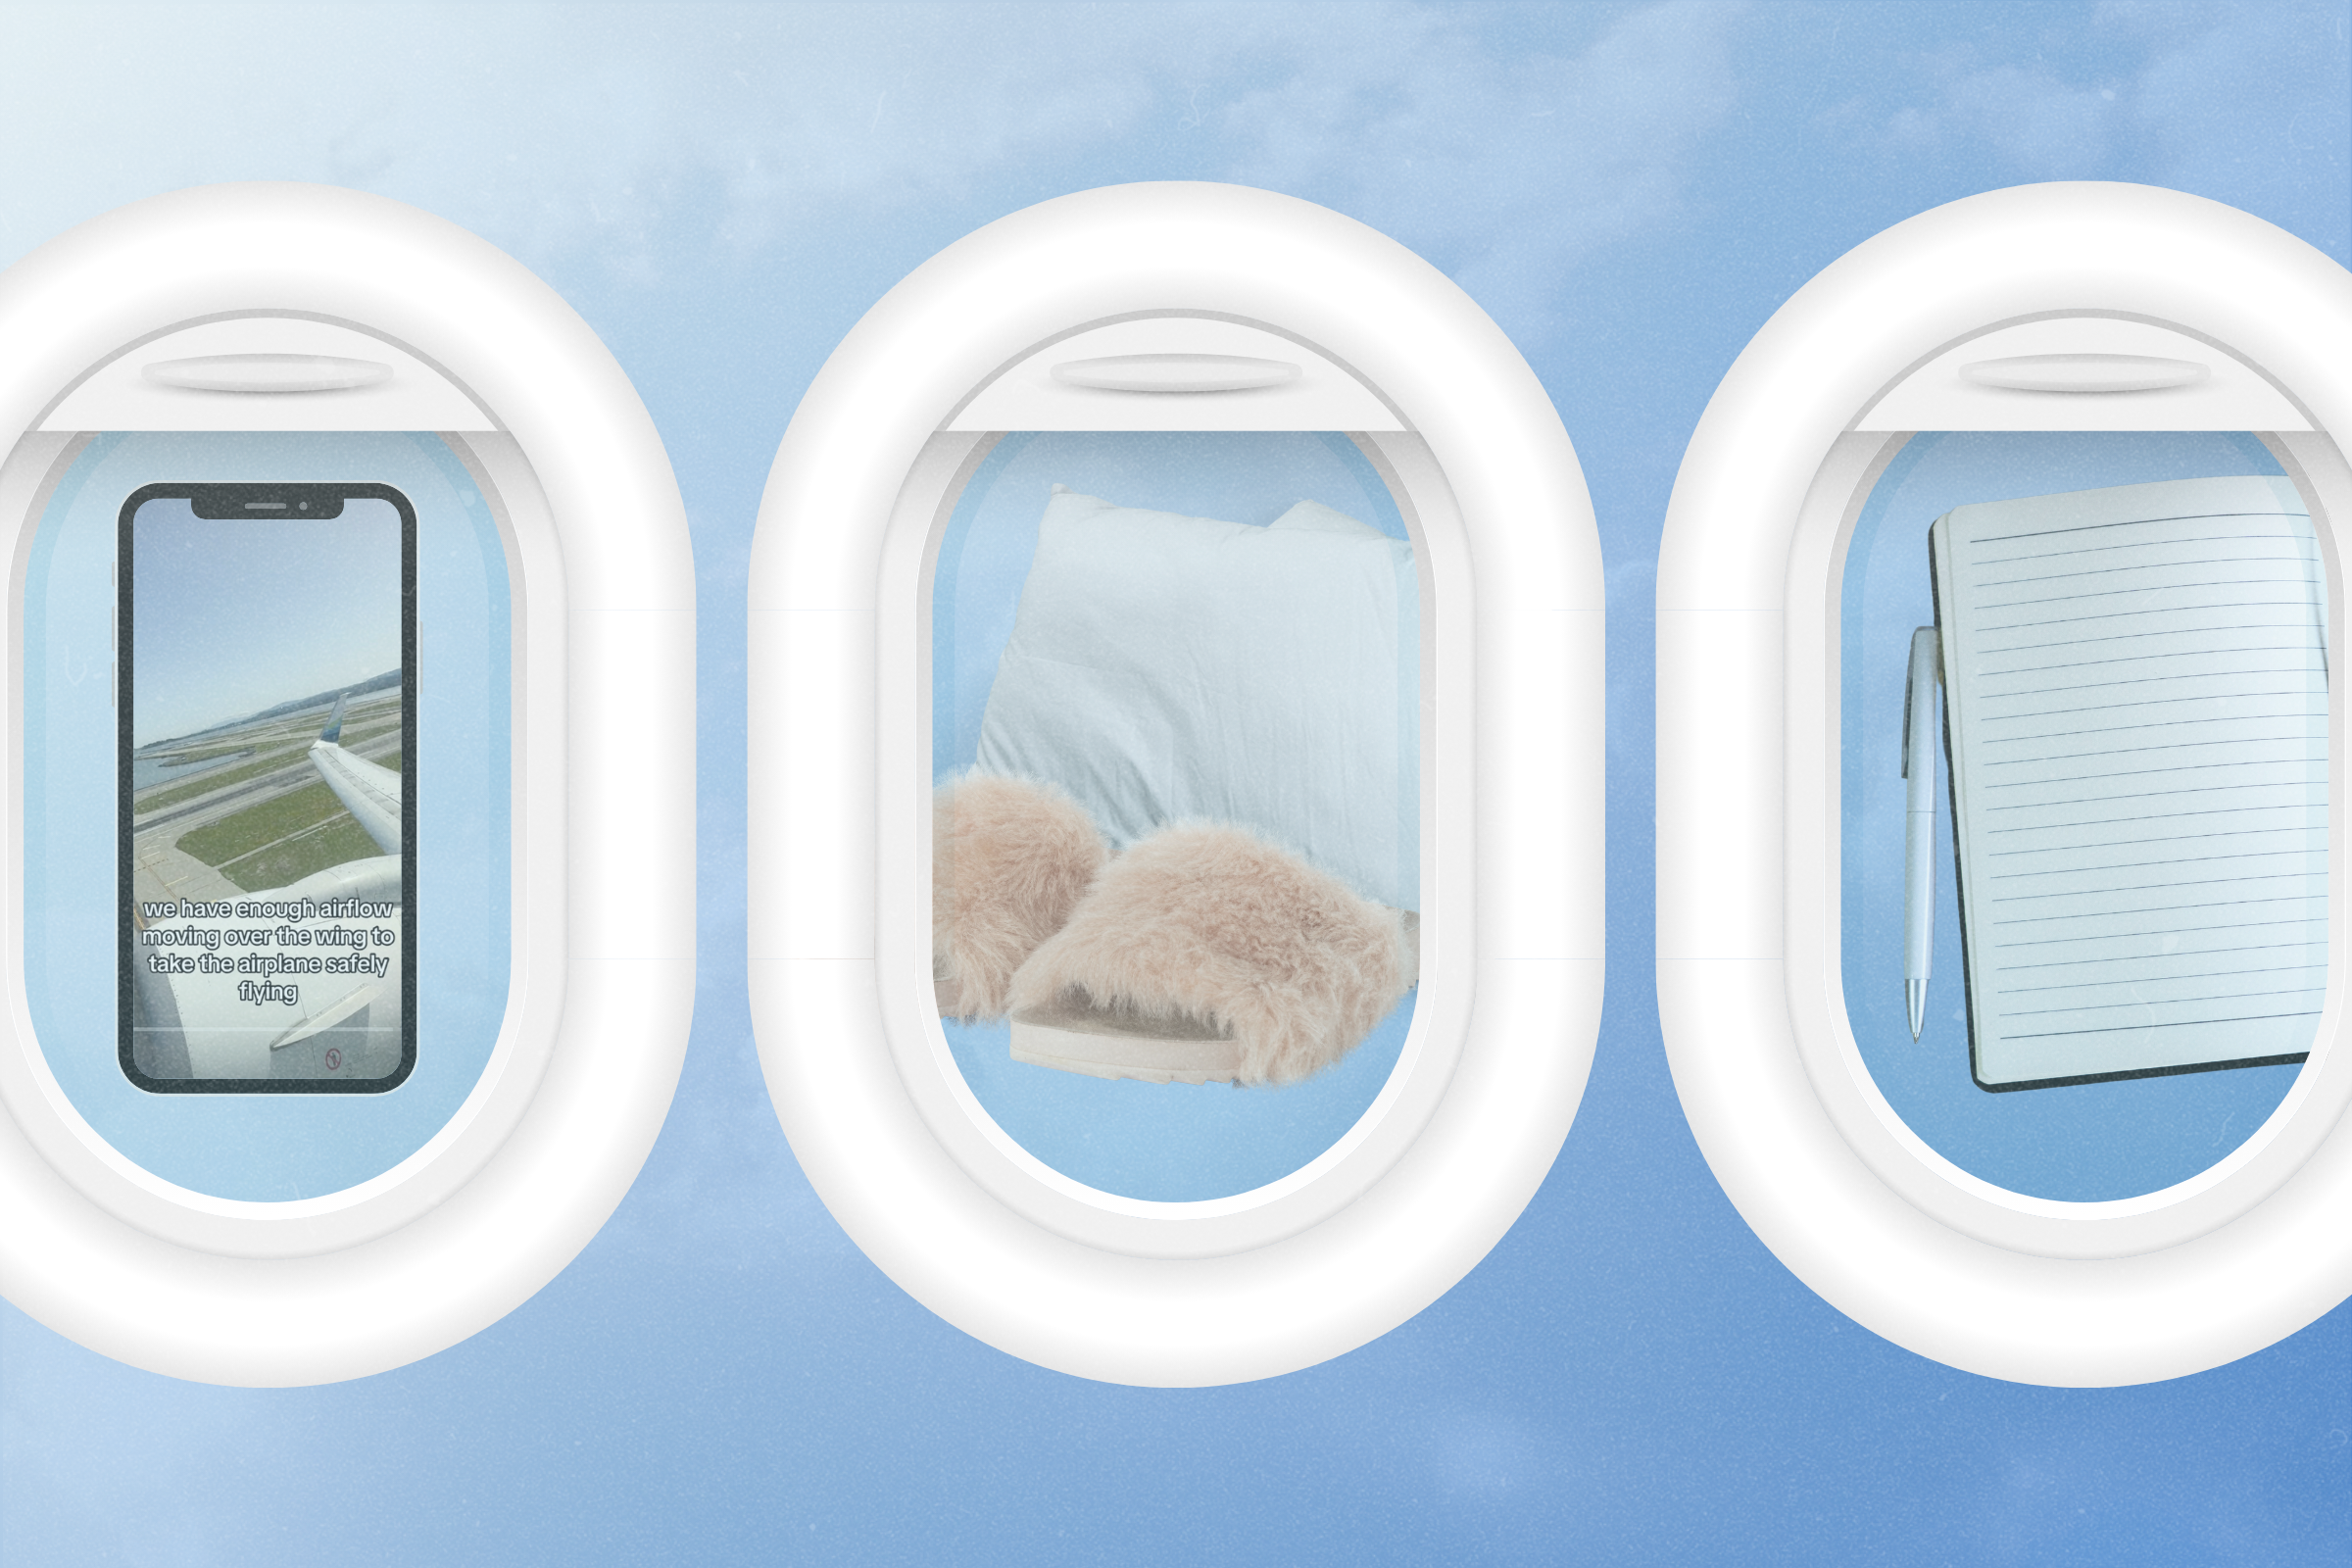 6 Tricks to Try to Calm Your Fear of Flying